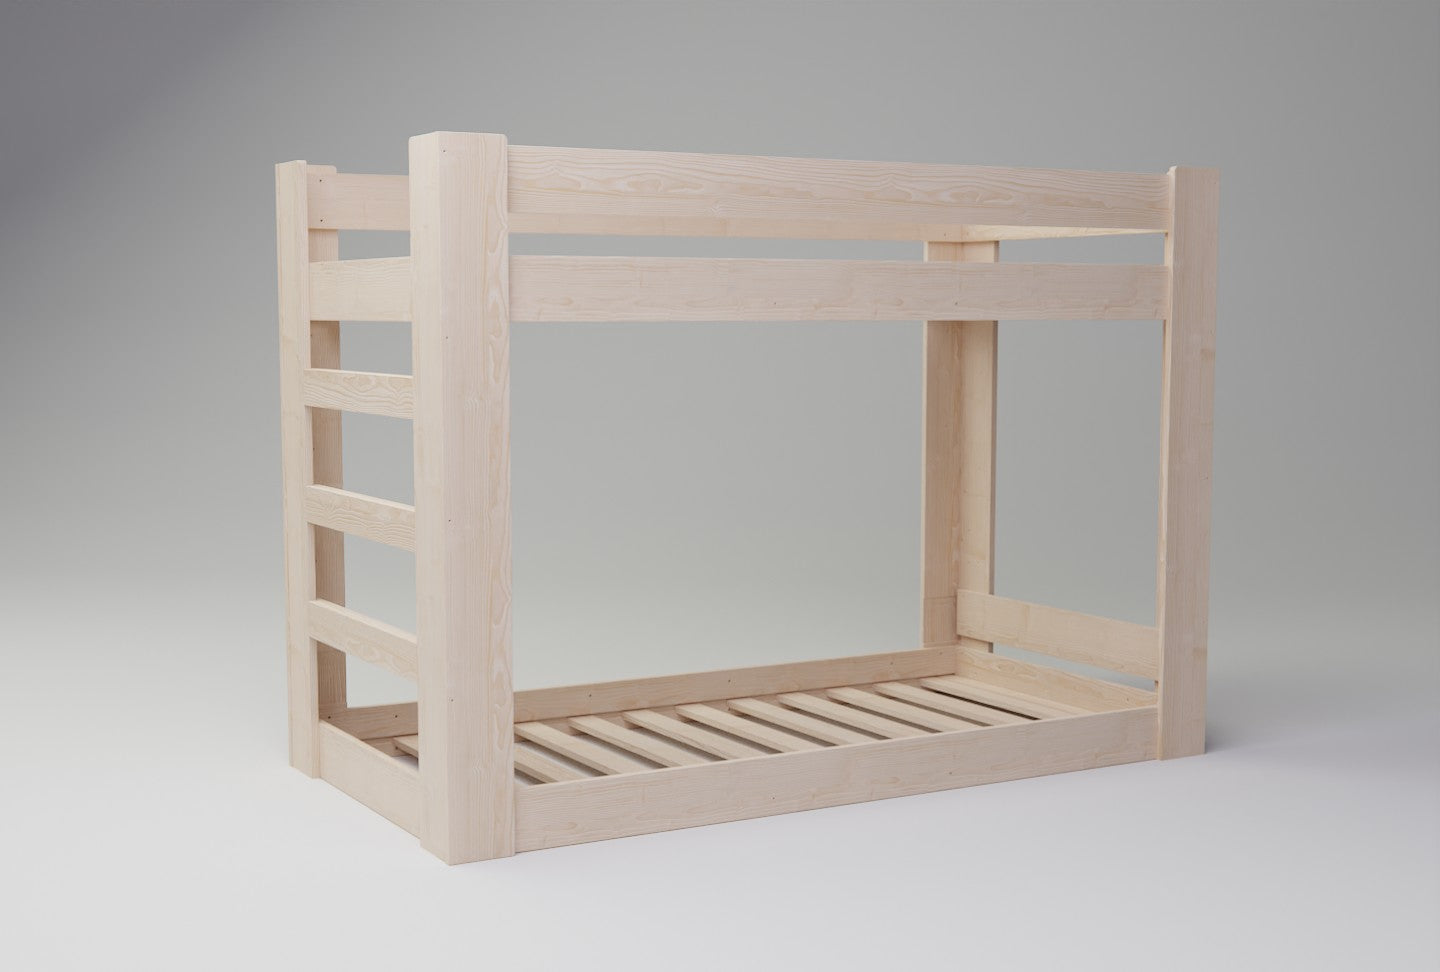 Eco-friendly and budget-friendly! Our bunk bed is made from solid NZ Pine and comes with flexible ladder positioning and optional drawer.